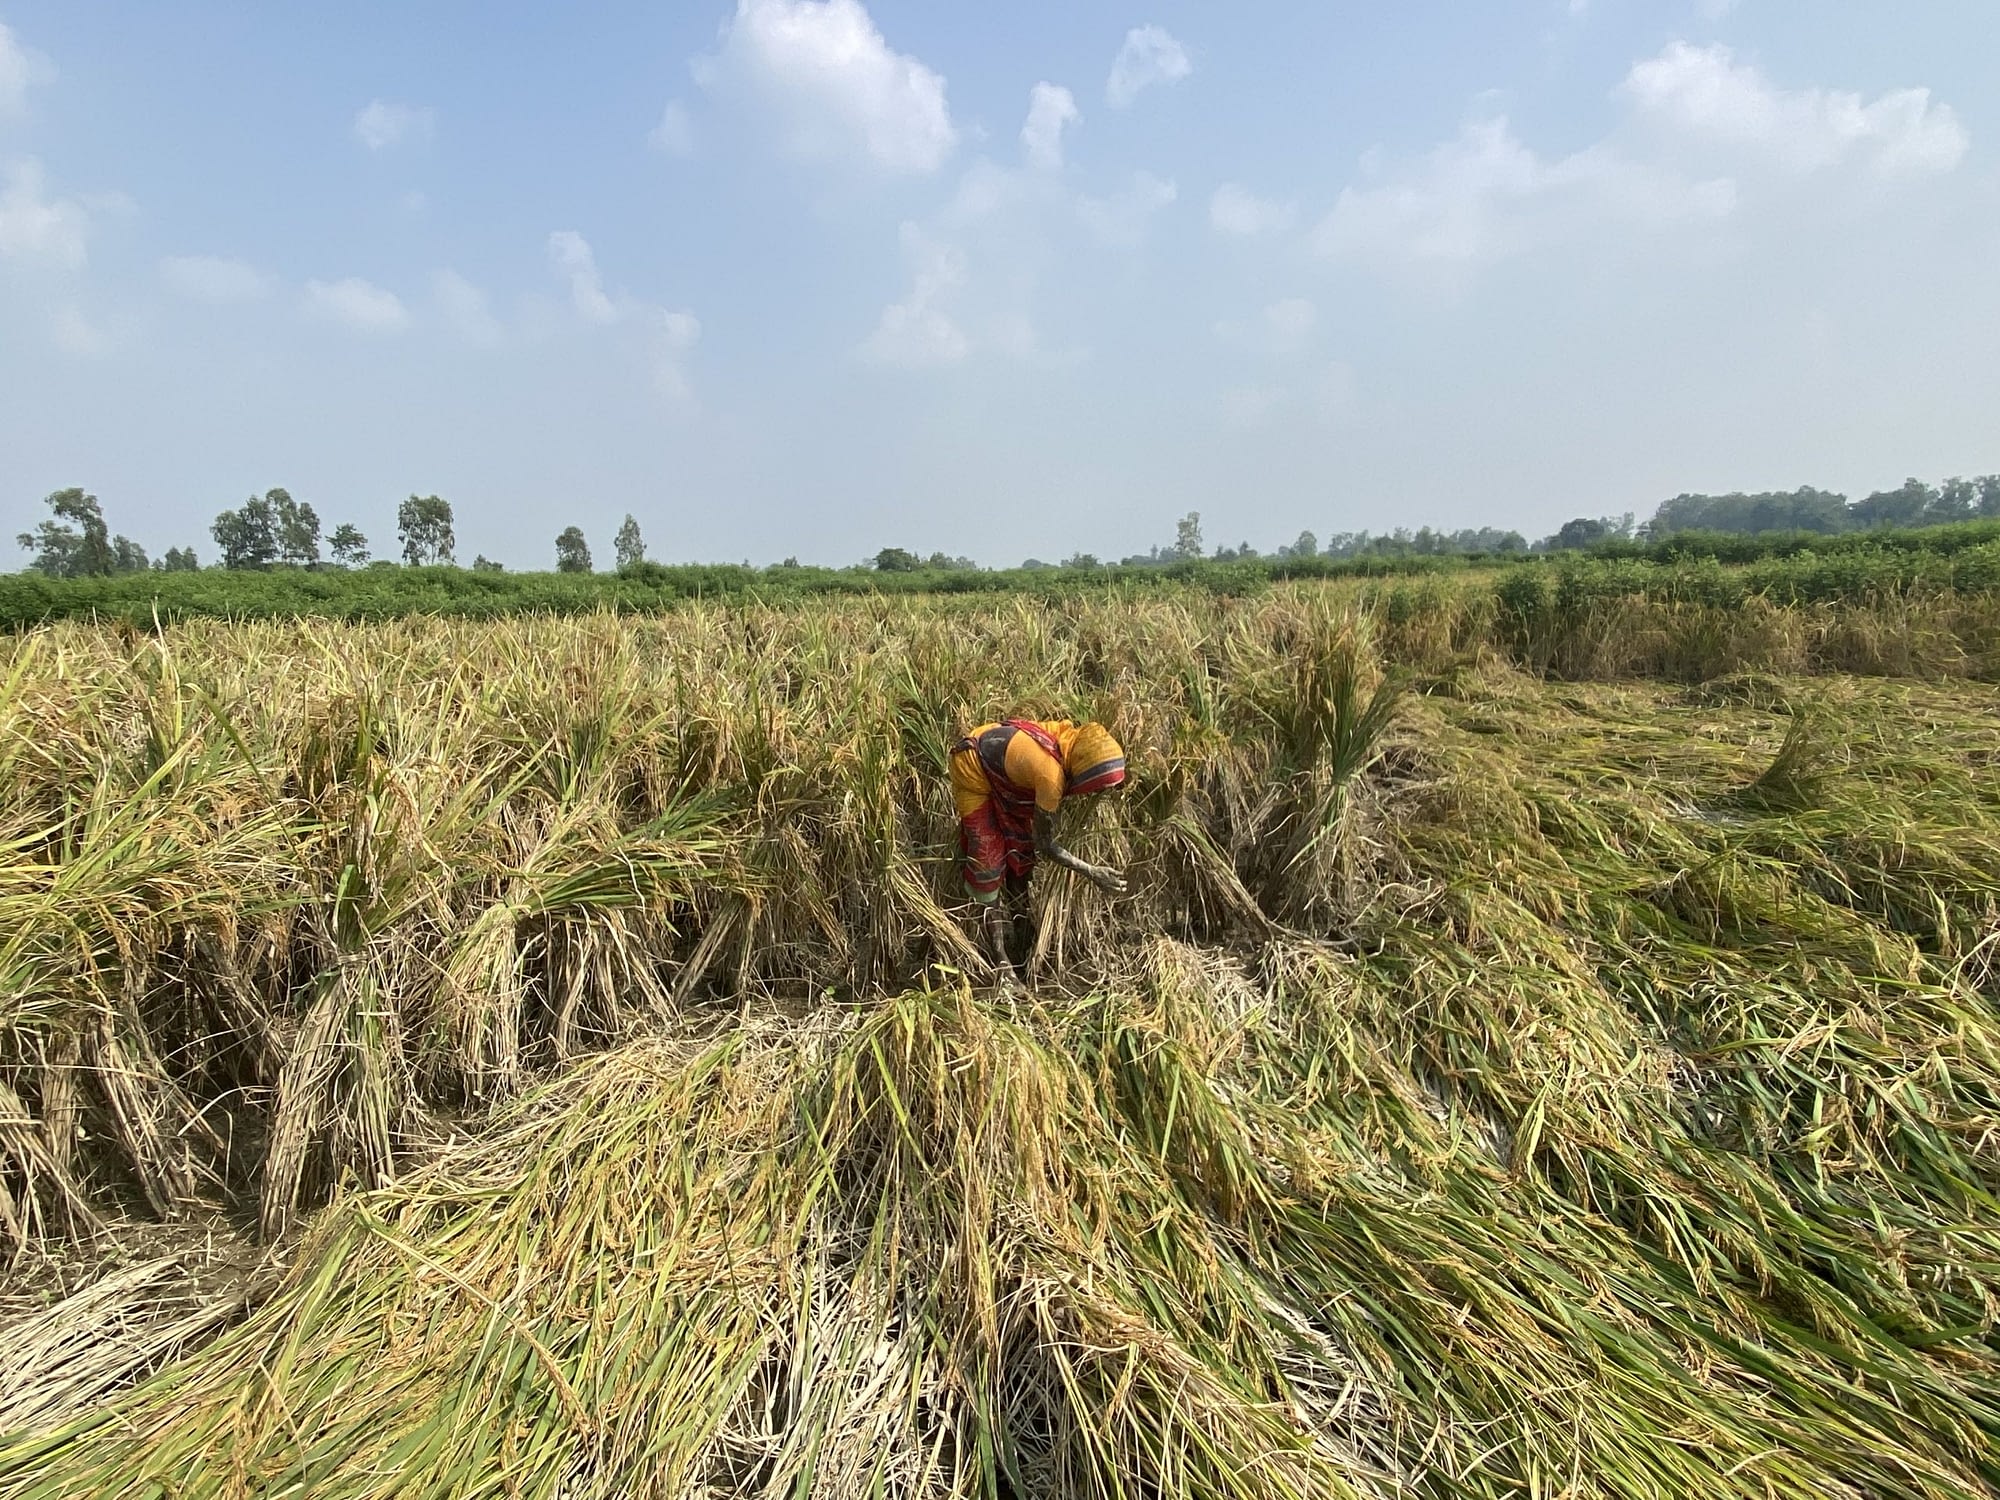 A women farmer picking up lodged paddy field after the untimely flash floods in Nepal (Photo: Sravan Shrestha/ICIMOD)